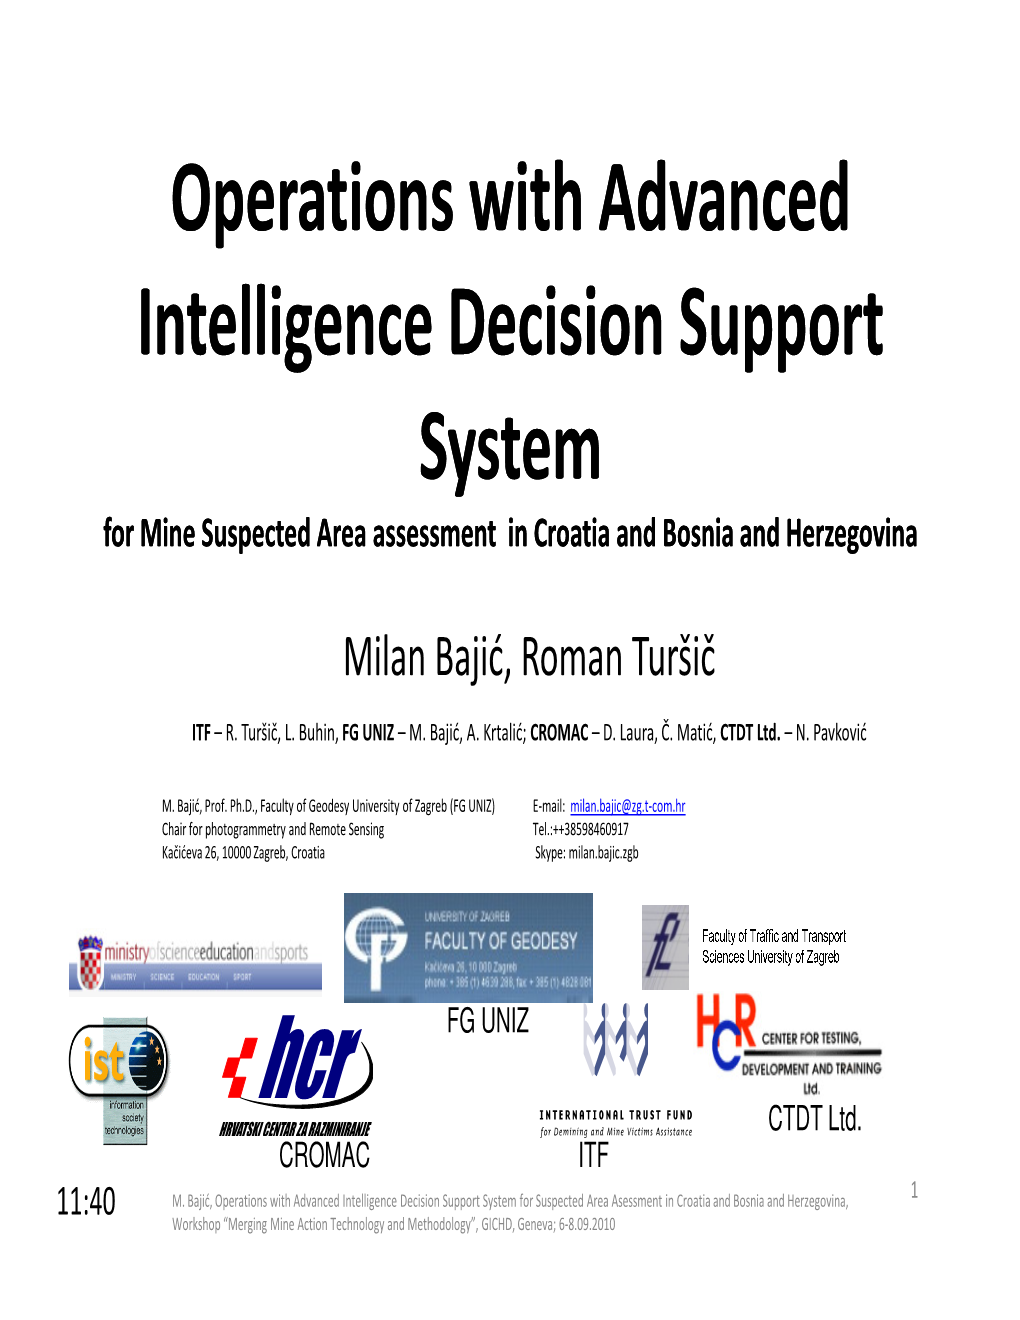 Operations with Advanced Intelligence Decision Support System for Mine Suspected Area Assessment in Croatia and Bosnia and Herzegovina